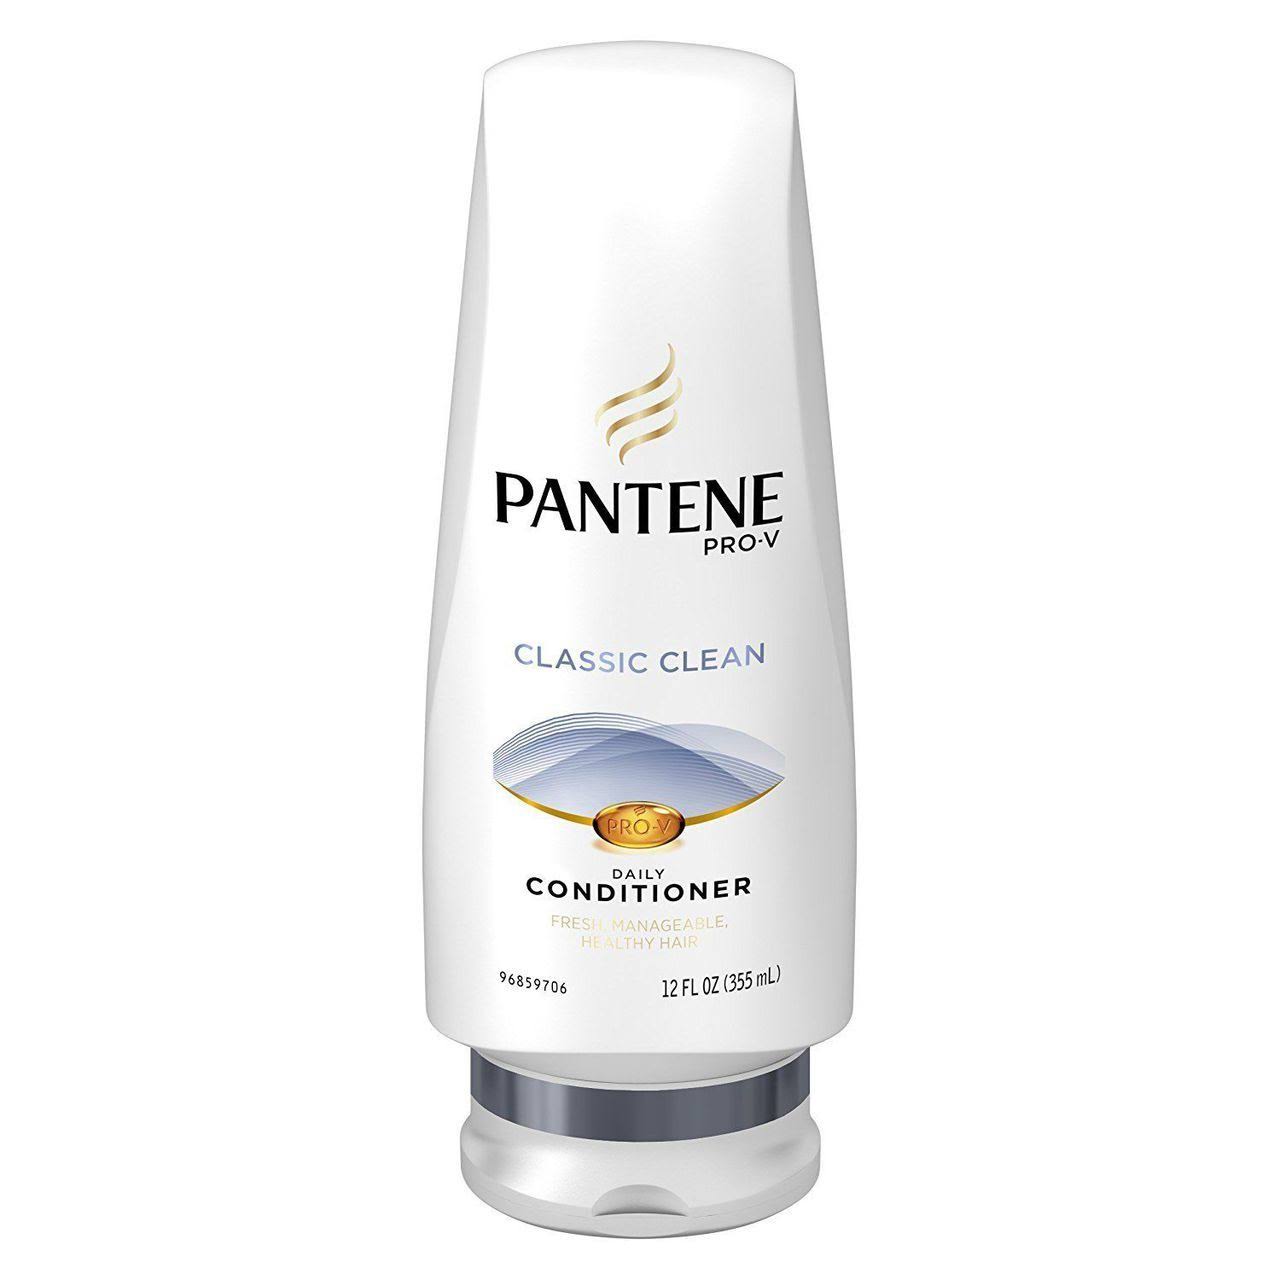 Pantene Pro-V Classic Clean Daily Conditioner - 355ml